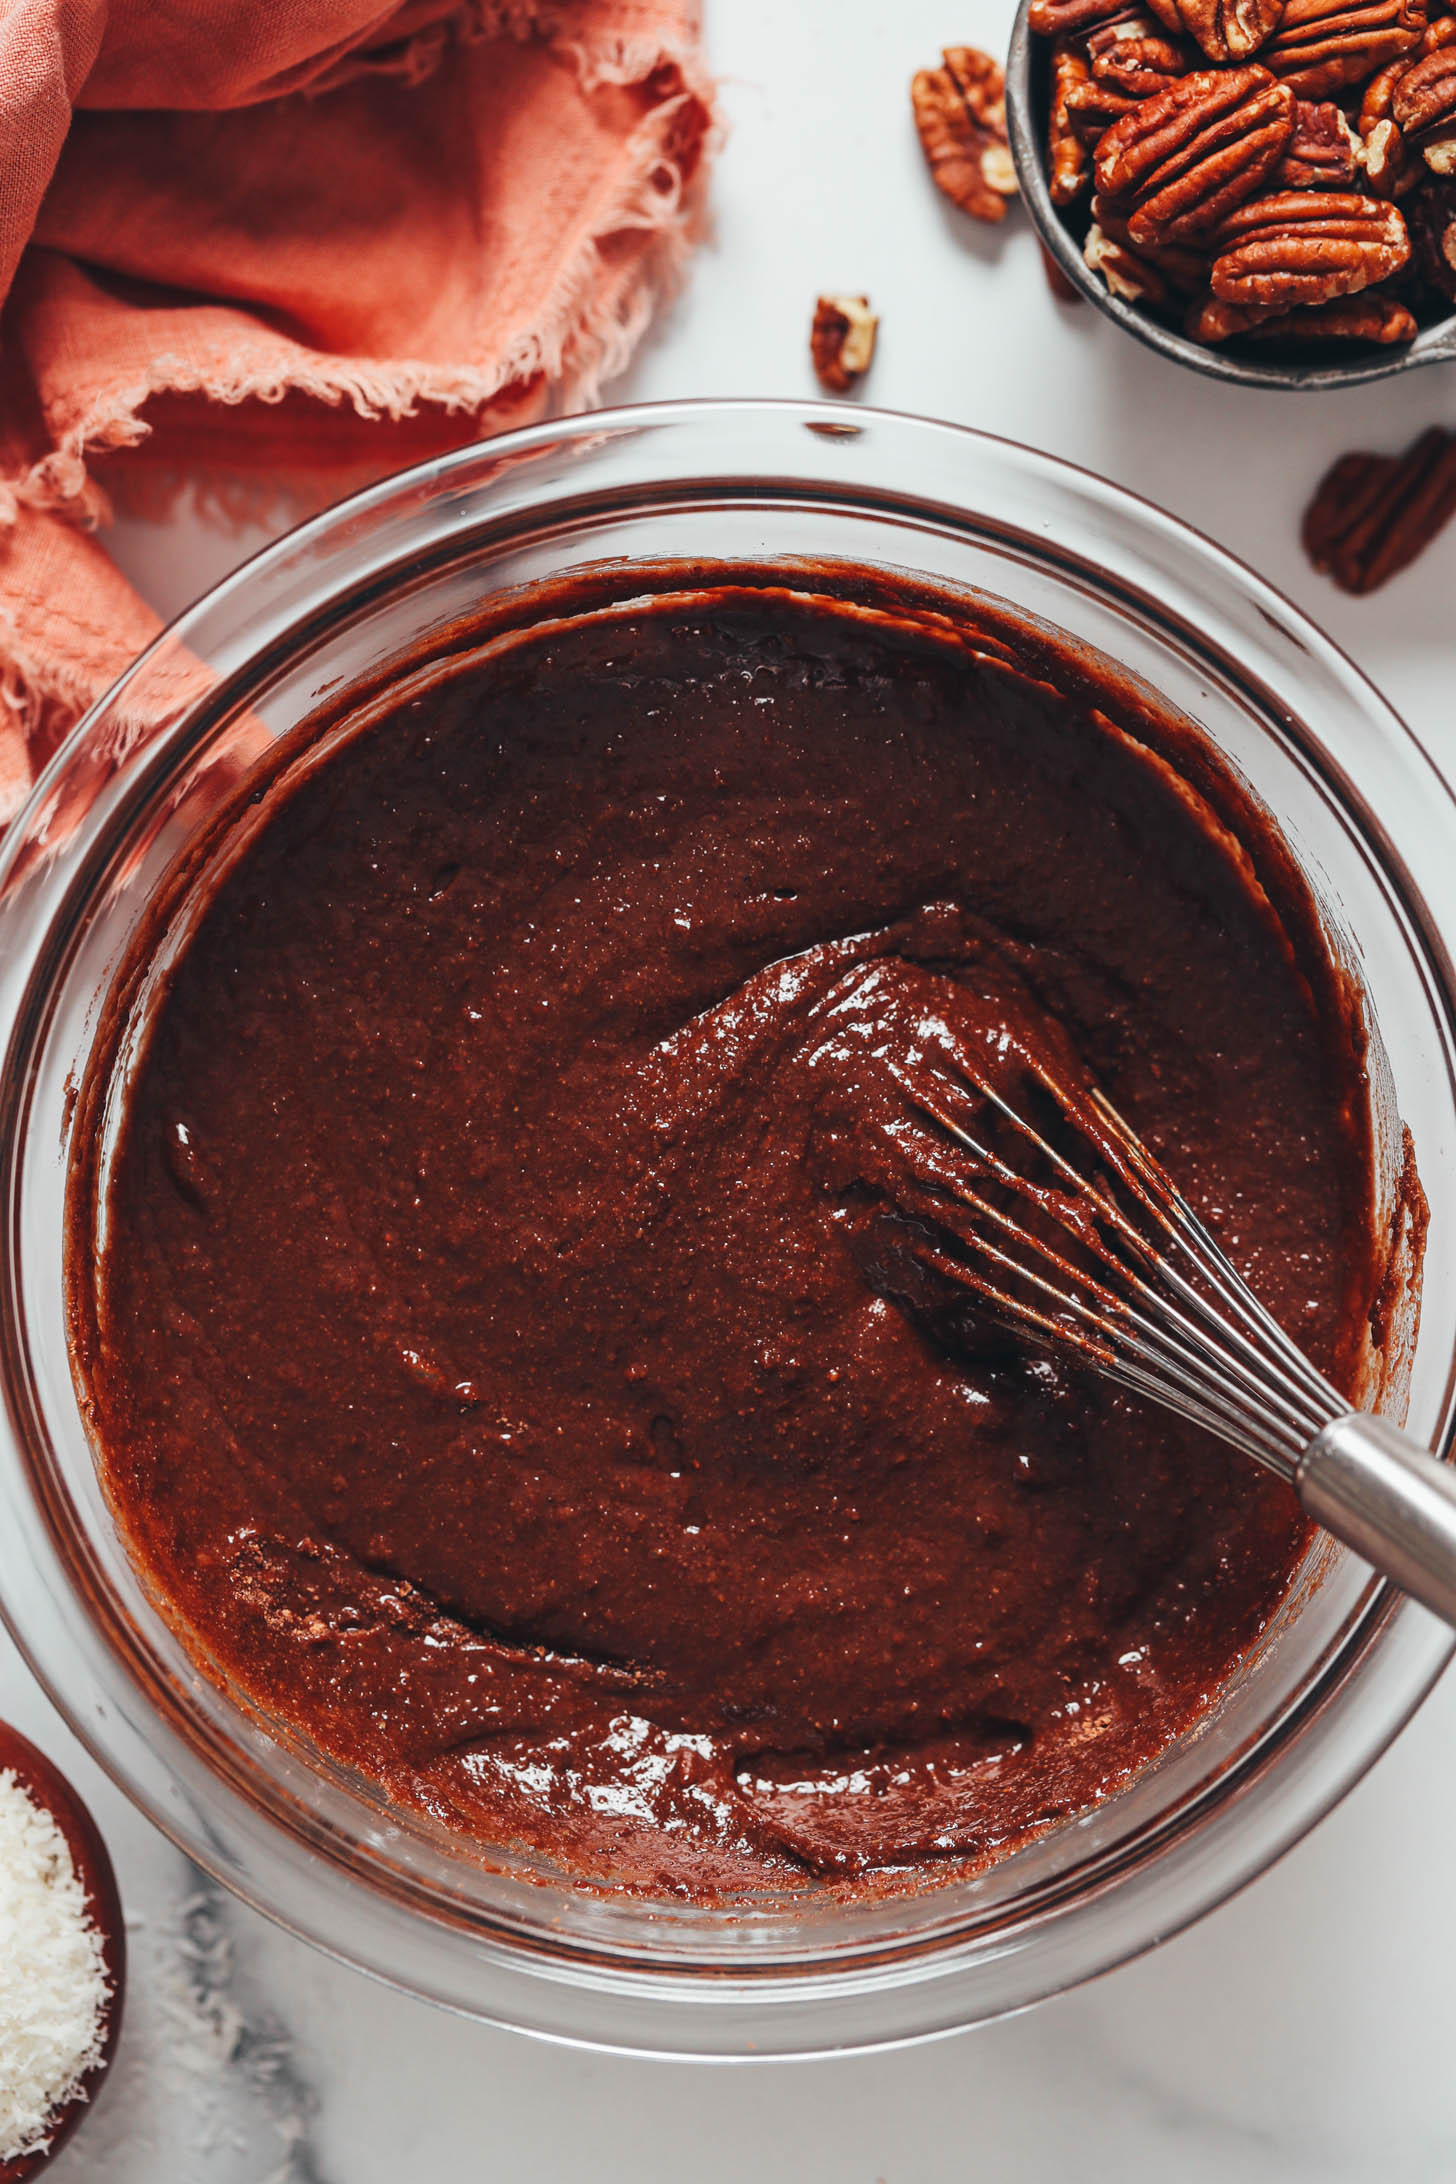 Whisk in a bowl of chocolate cake batter